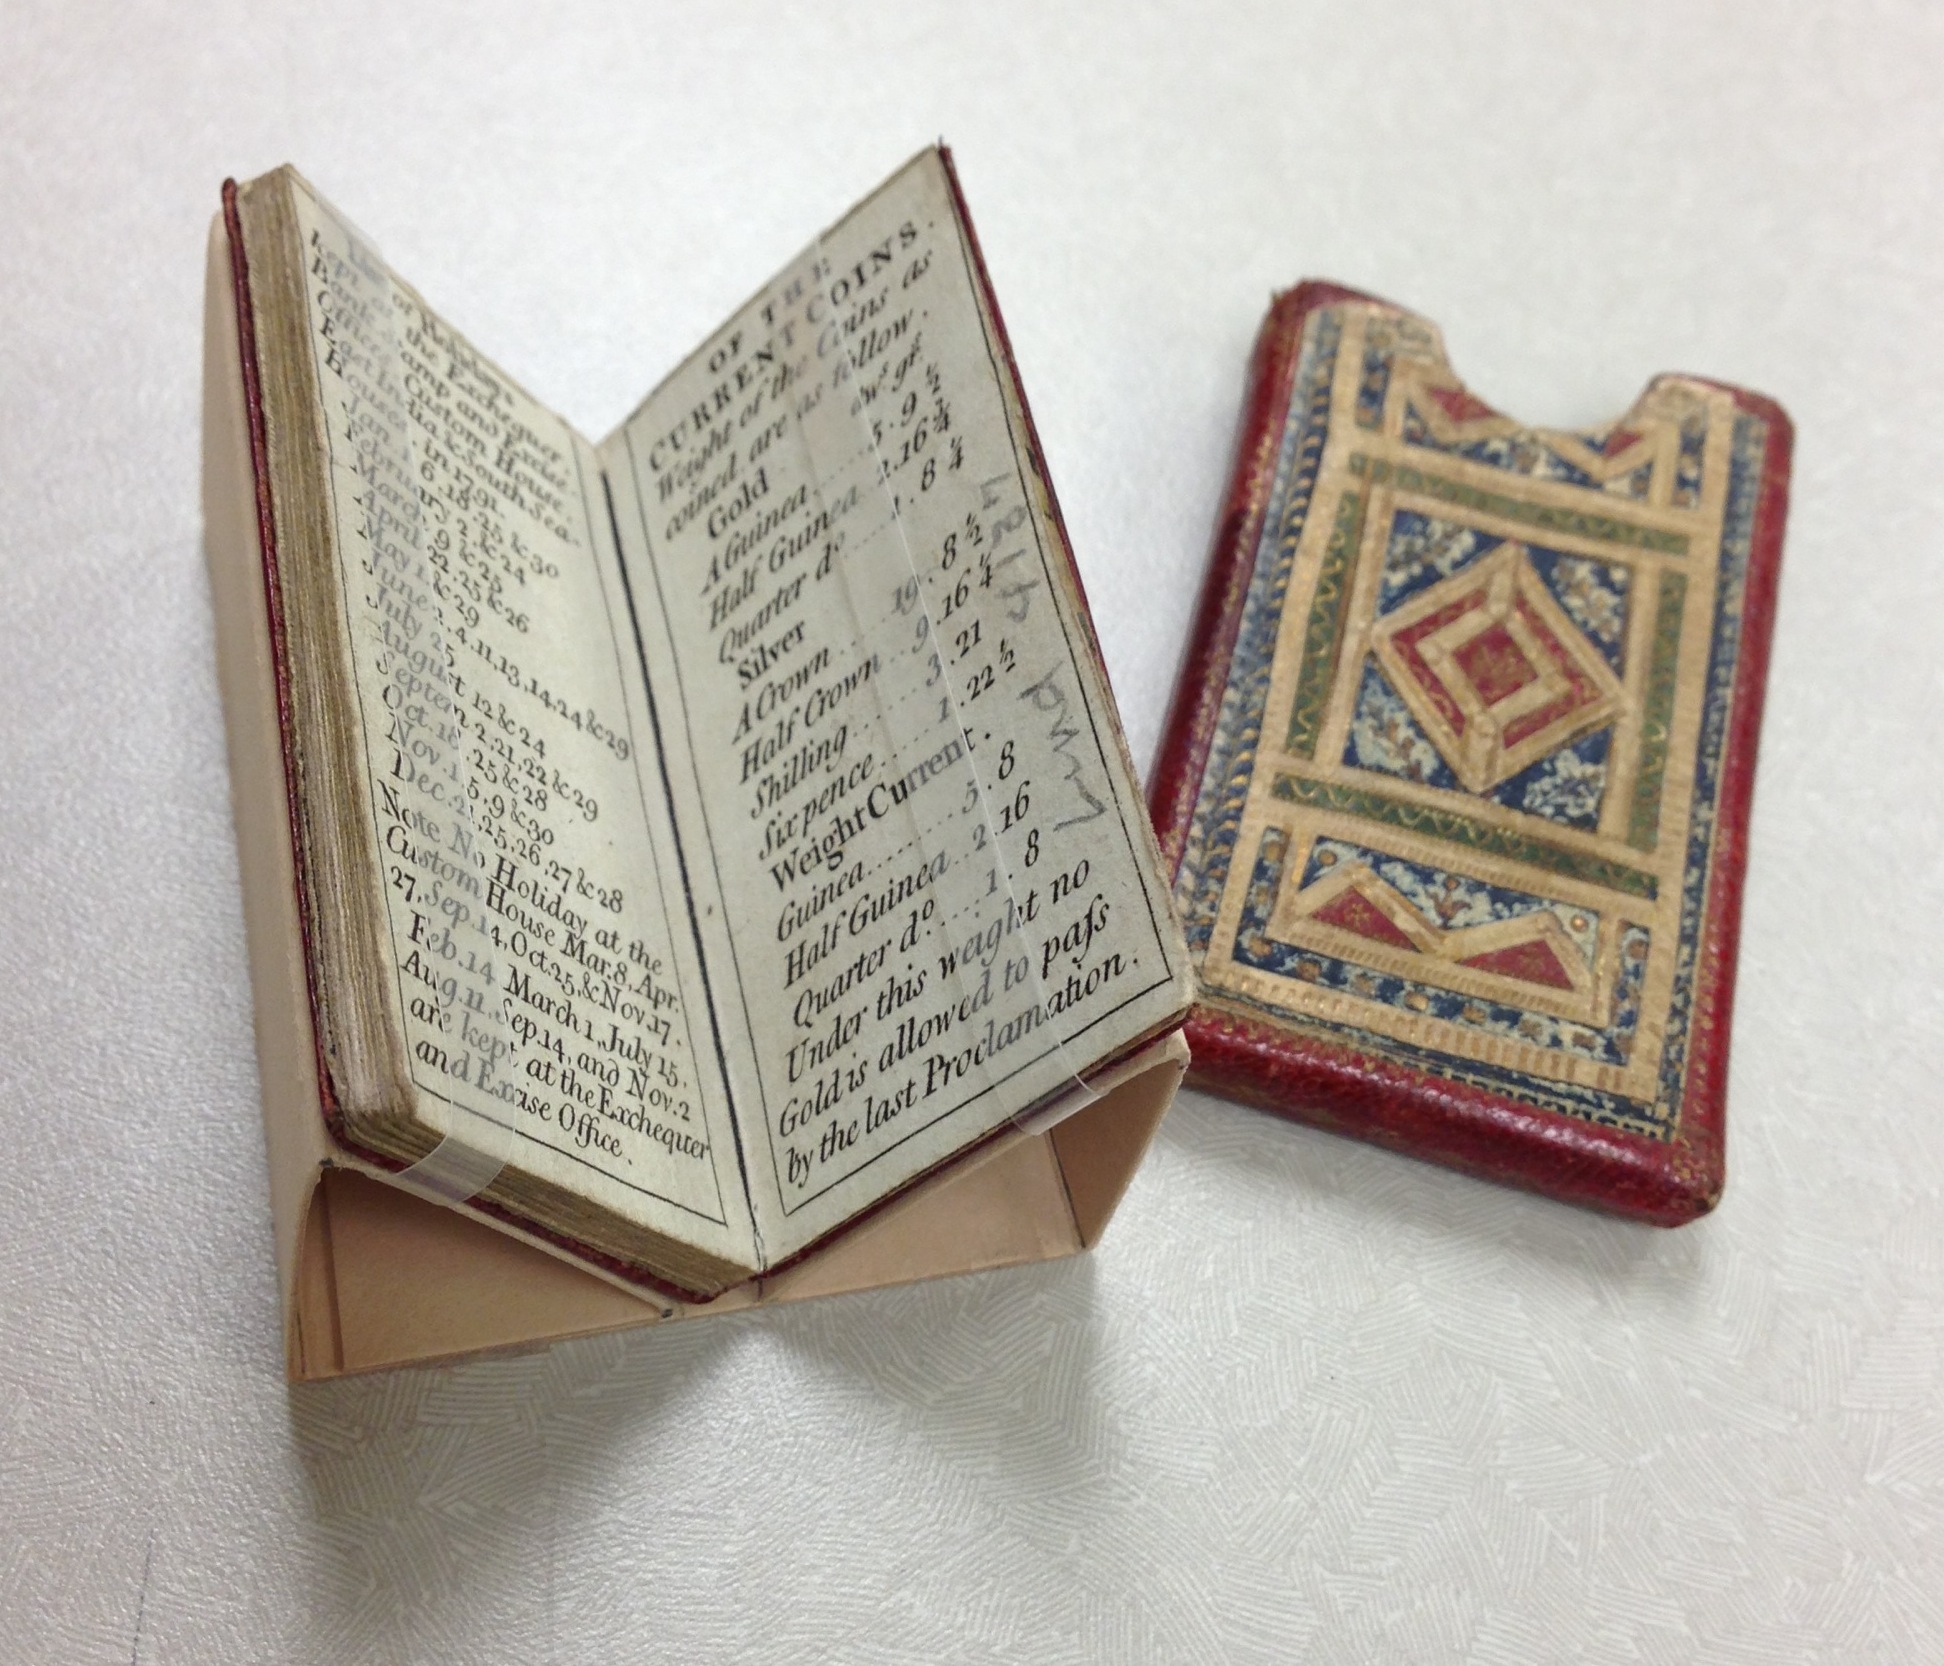 How to make miniature book mounts with everyday library supplies